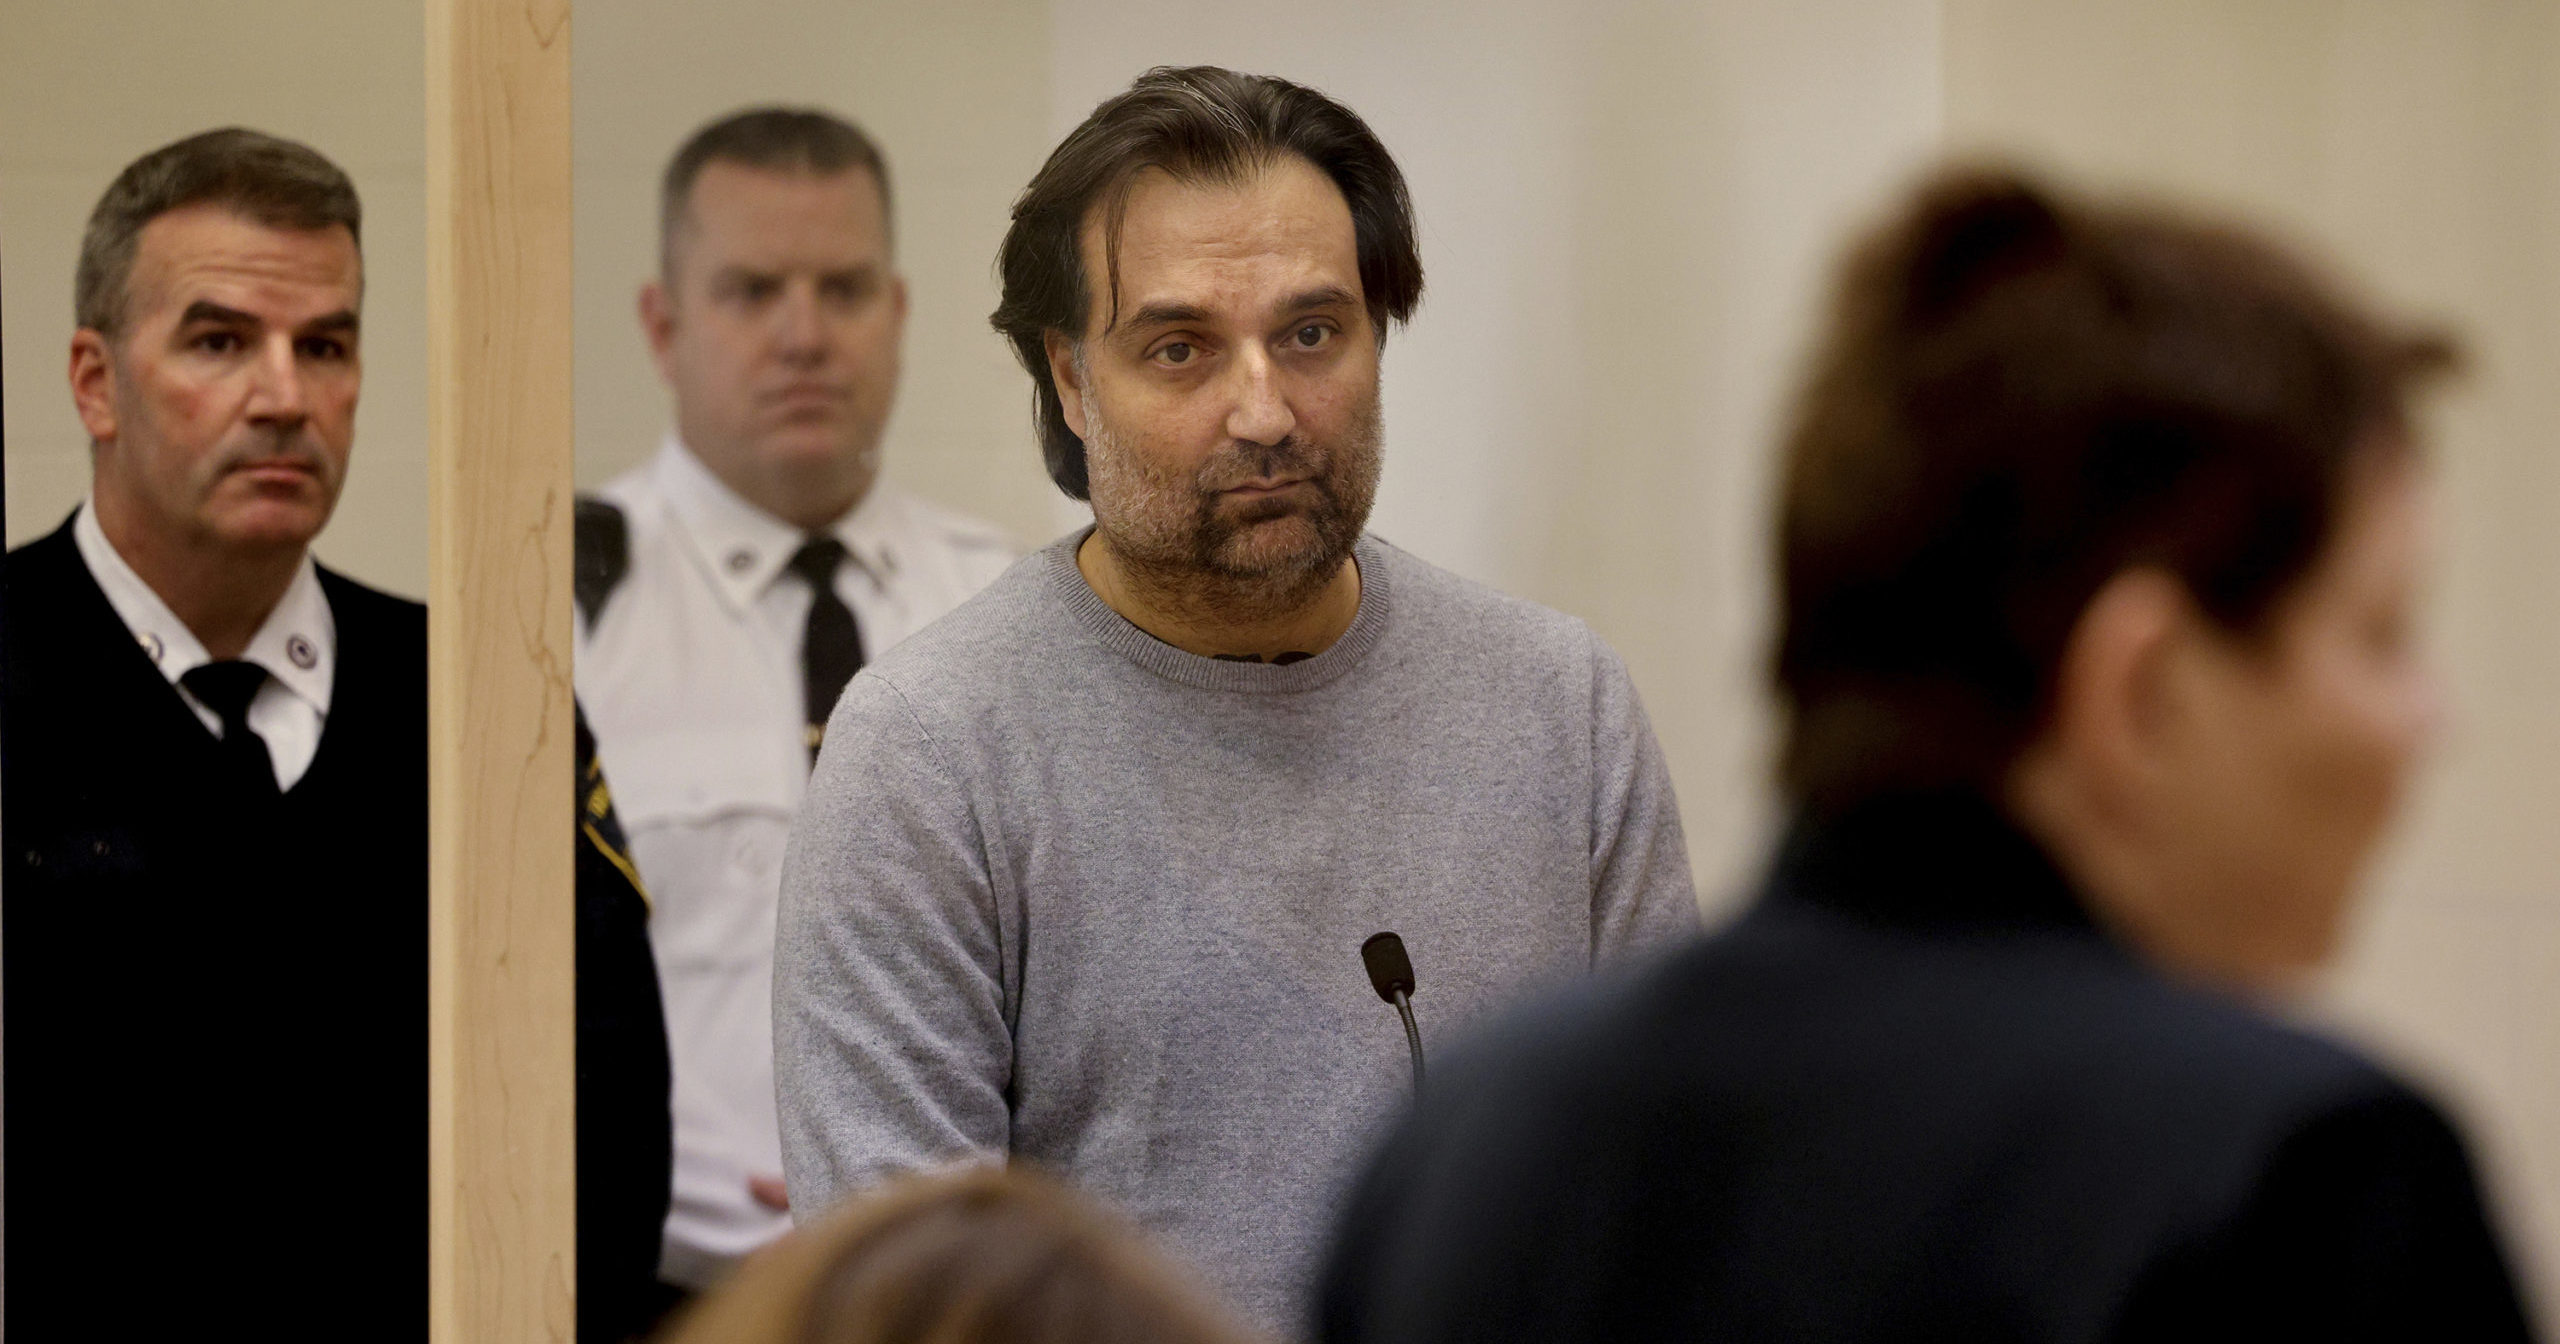 Brian Walshe, center, listens during his arraignment Wednesday at Quincy District Court in Quincy, Massachusetts.